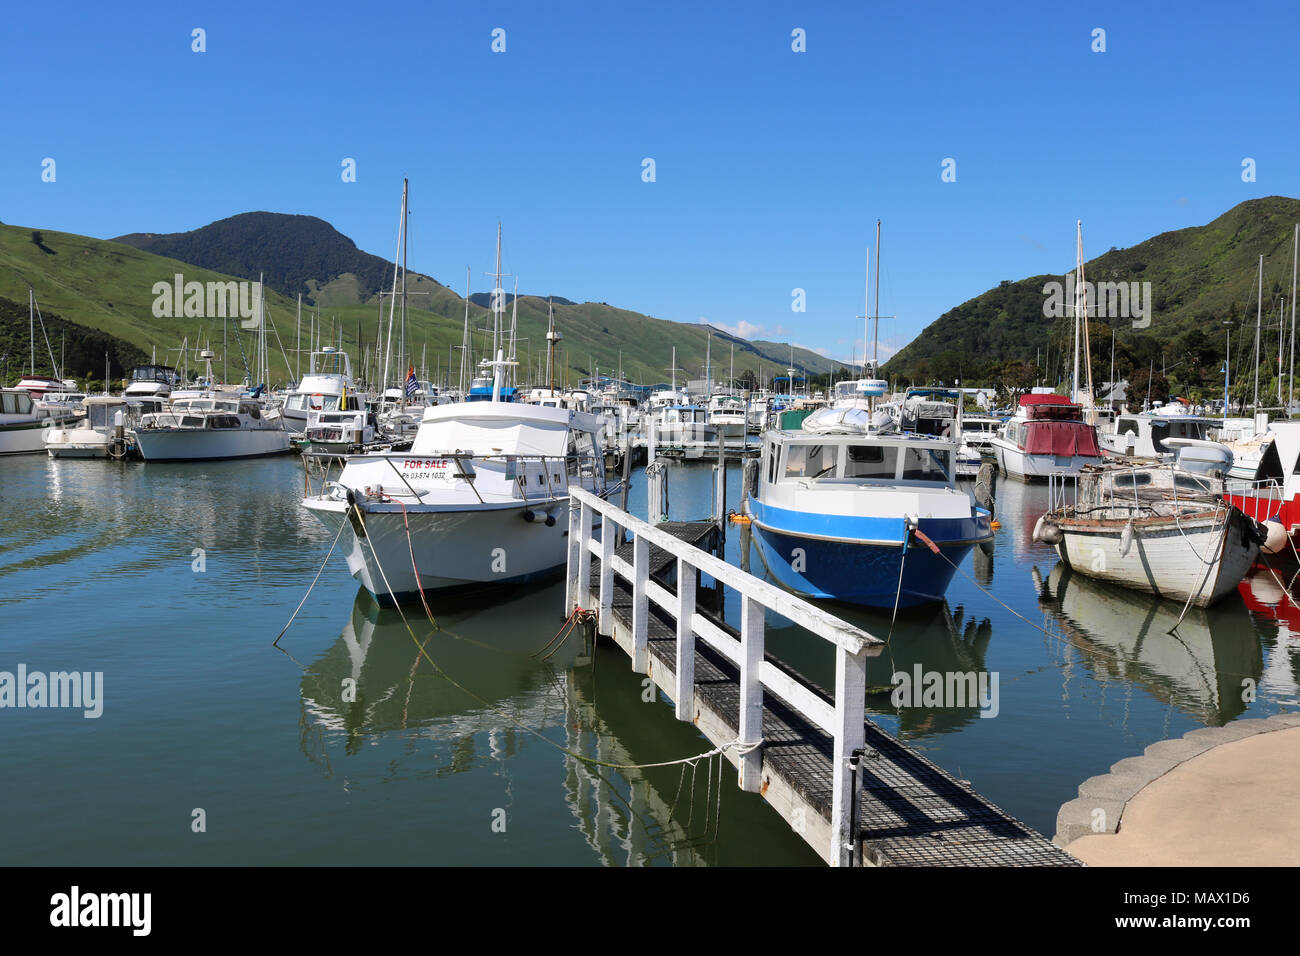 View of boats and yachts in the marina at Havelock on Pelorus Sound, Marlborough region, South Island, New Zealand Stock Photo